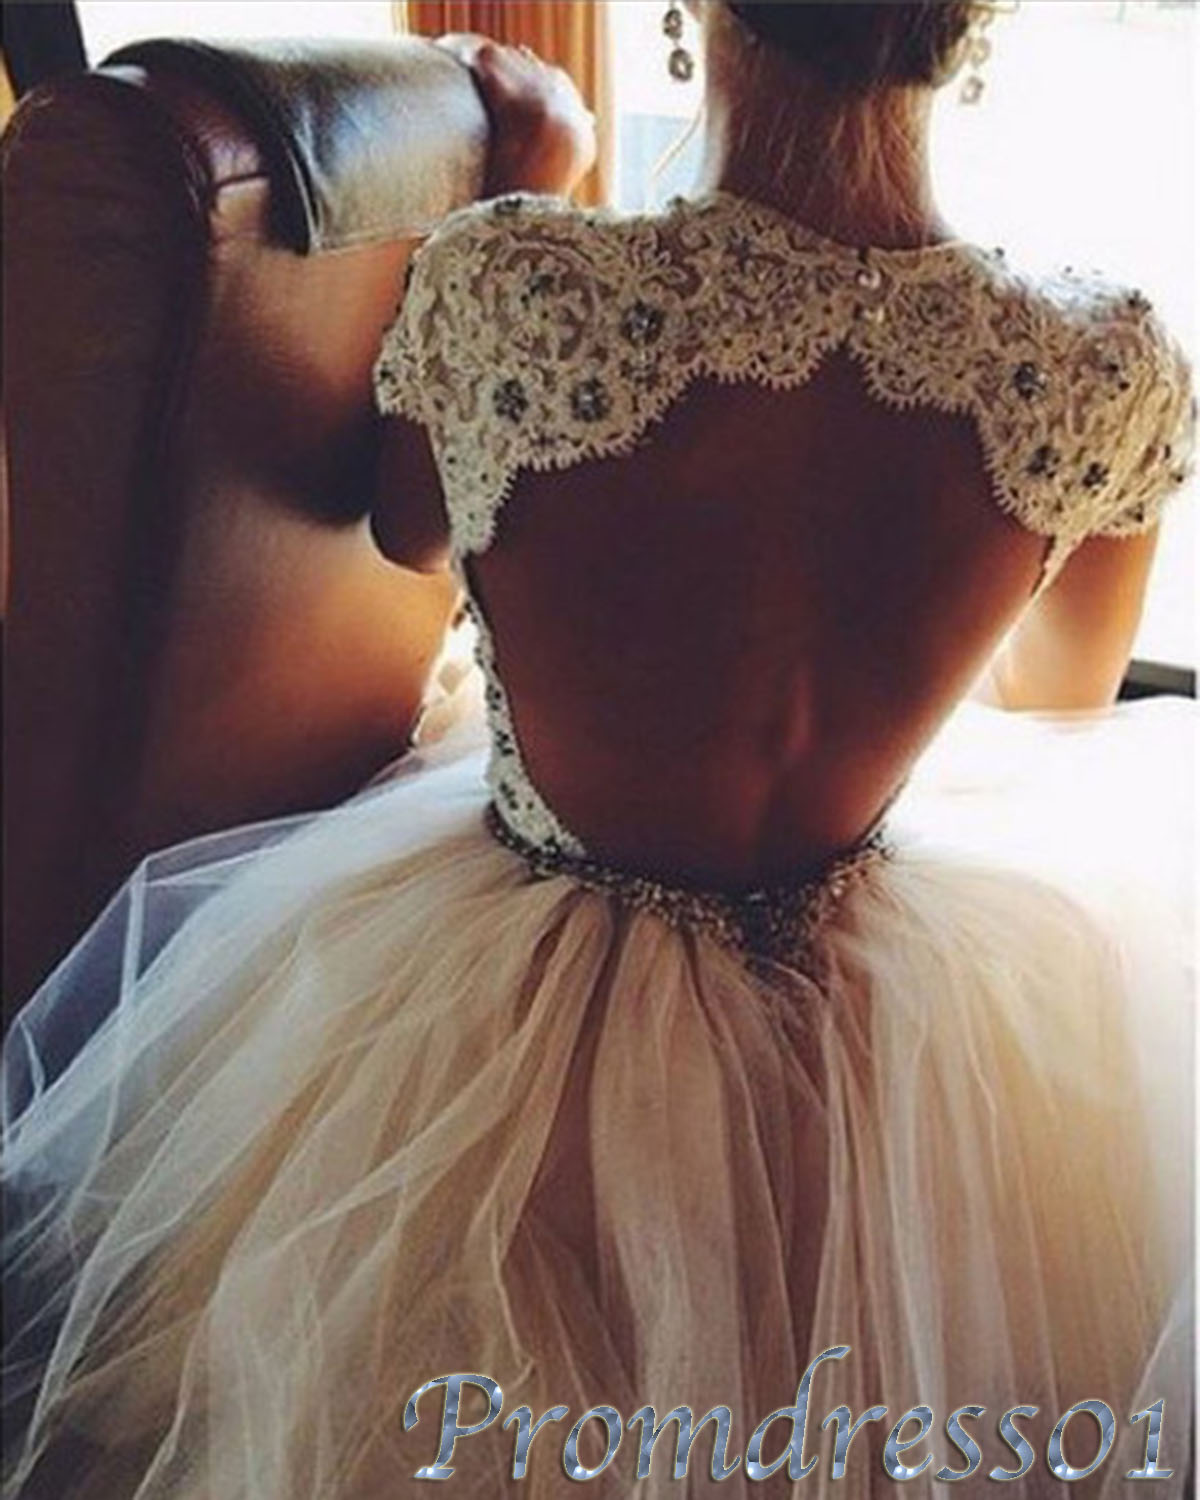 Lace Back White Dress And Best Choice